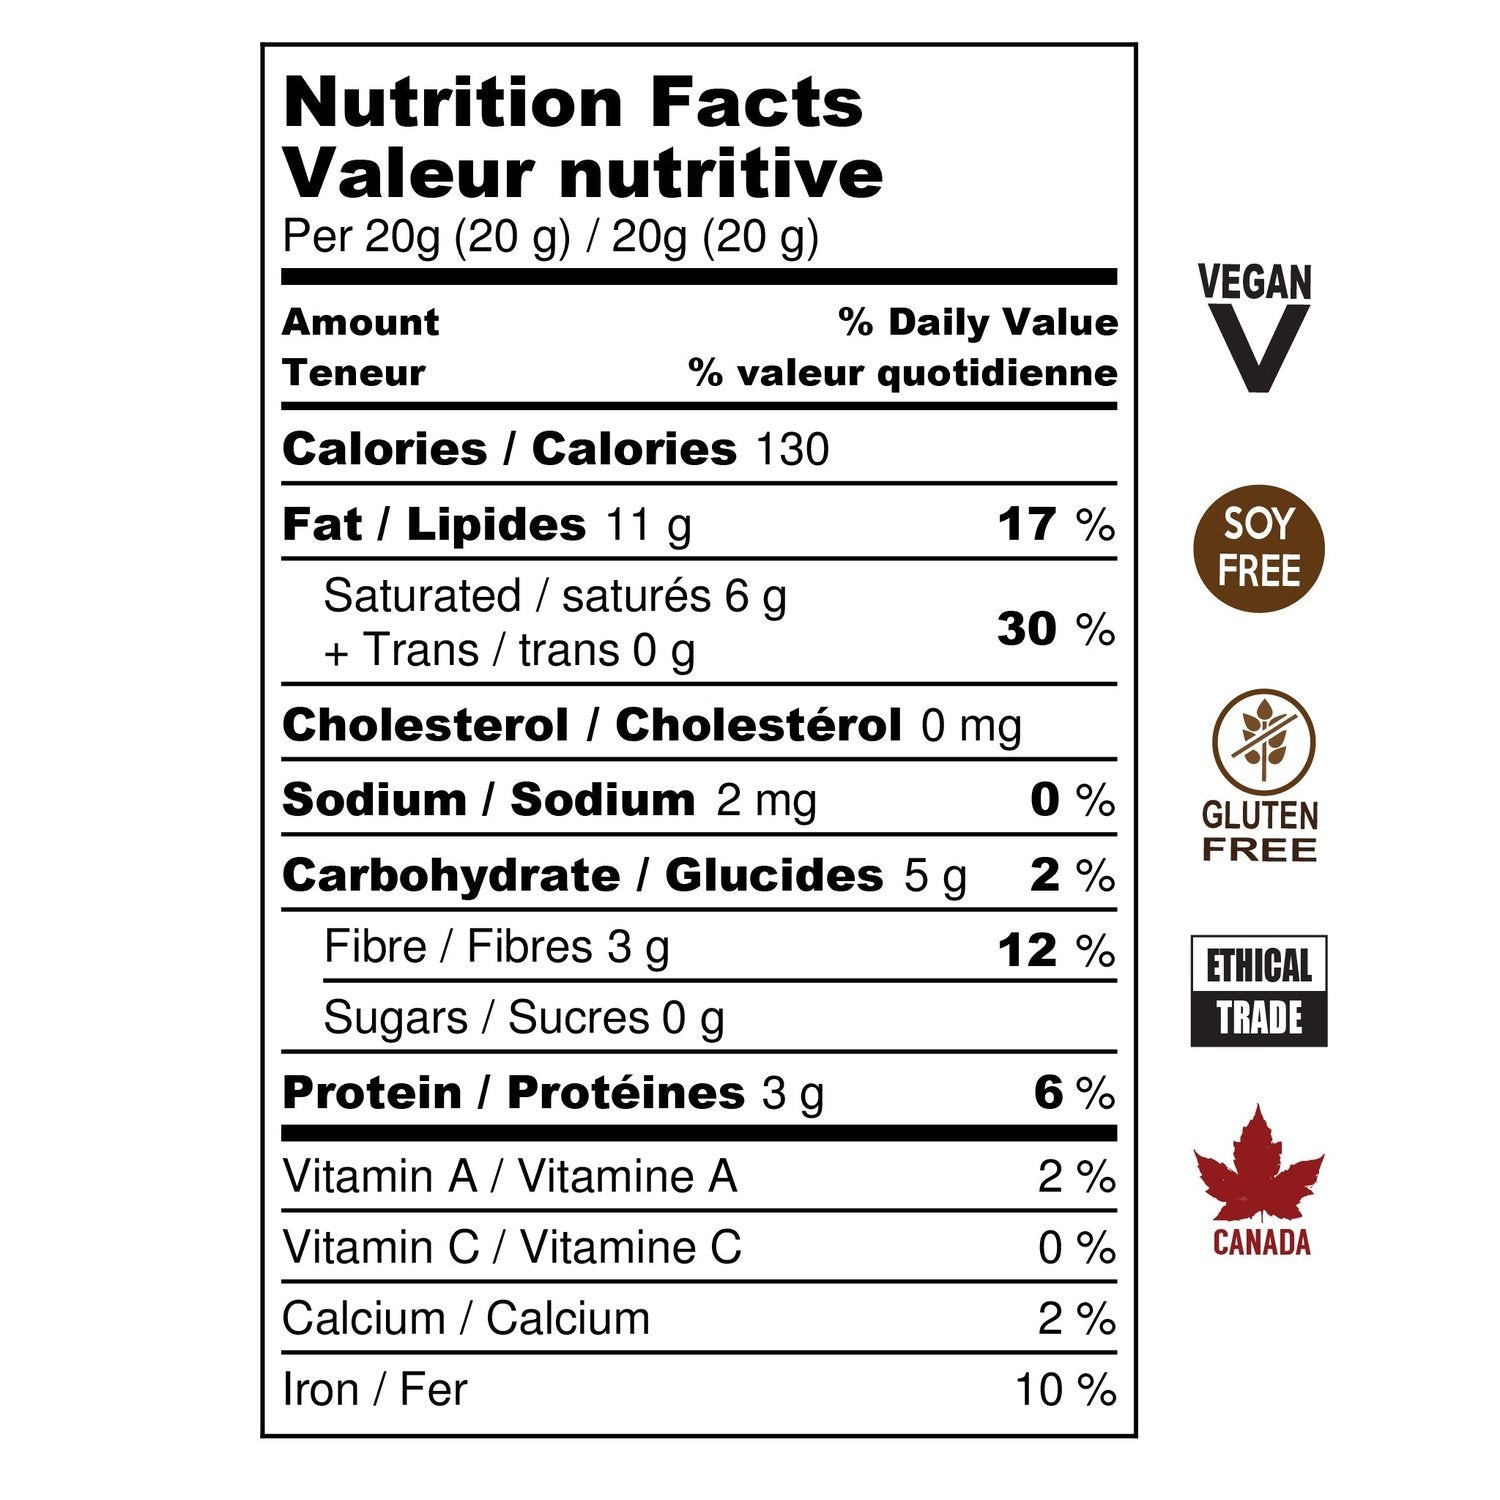 Nutritional Facts for Roasted Cacao Nibs. Vegan, Soy Free, Gluten Free, Ethical Trade, Made in Canada